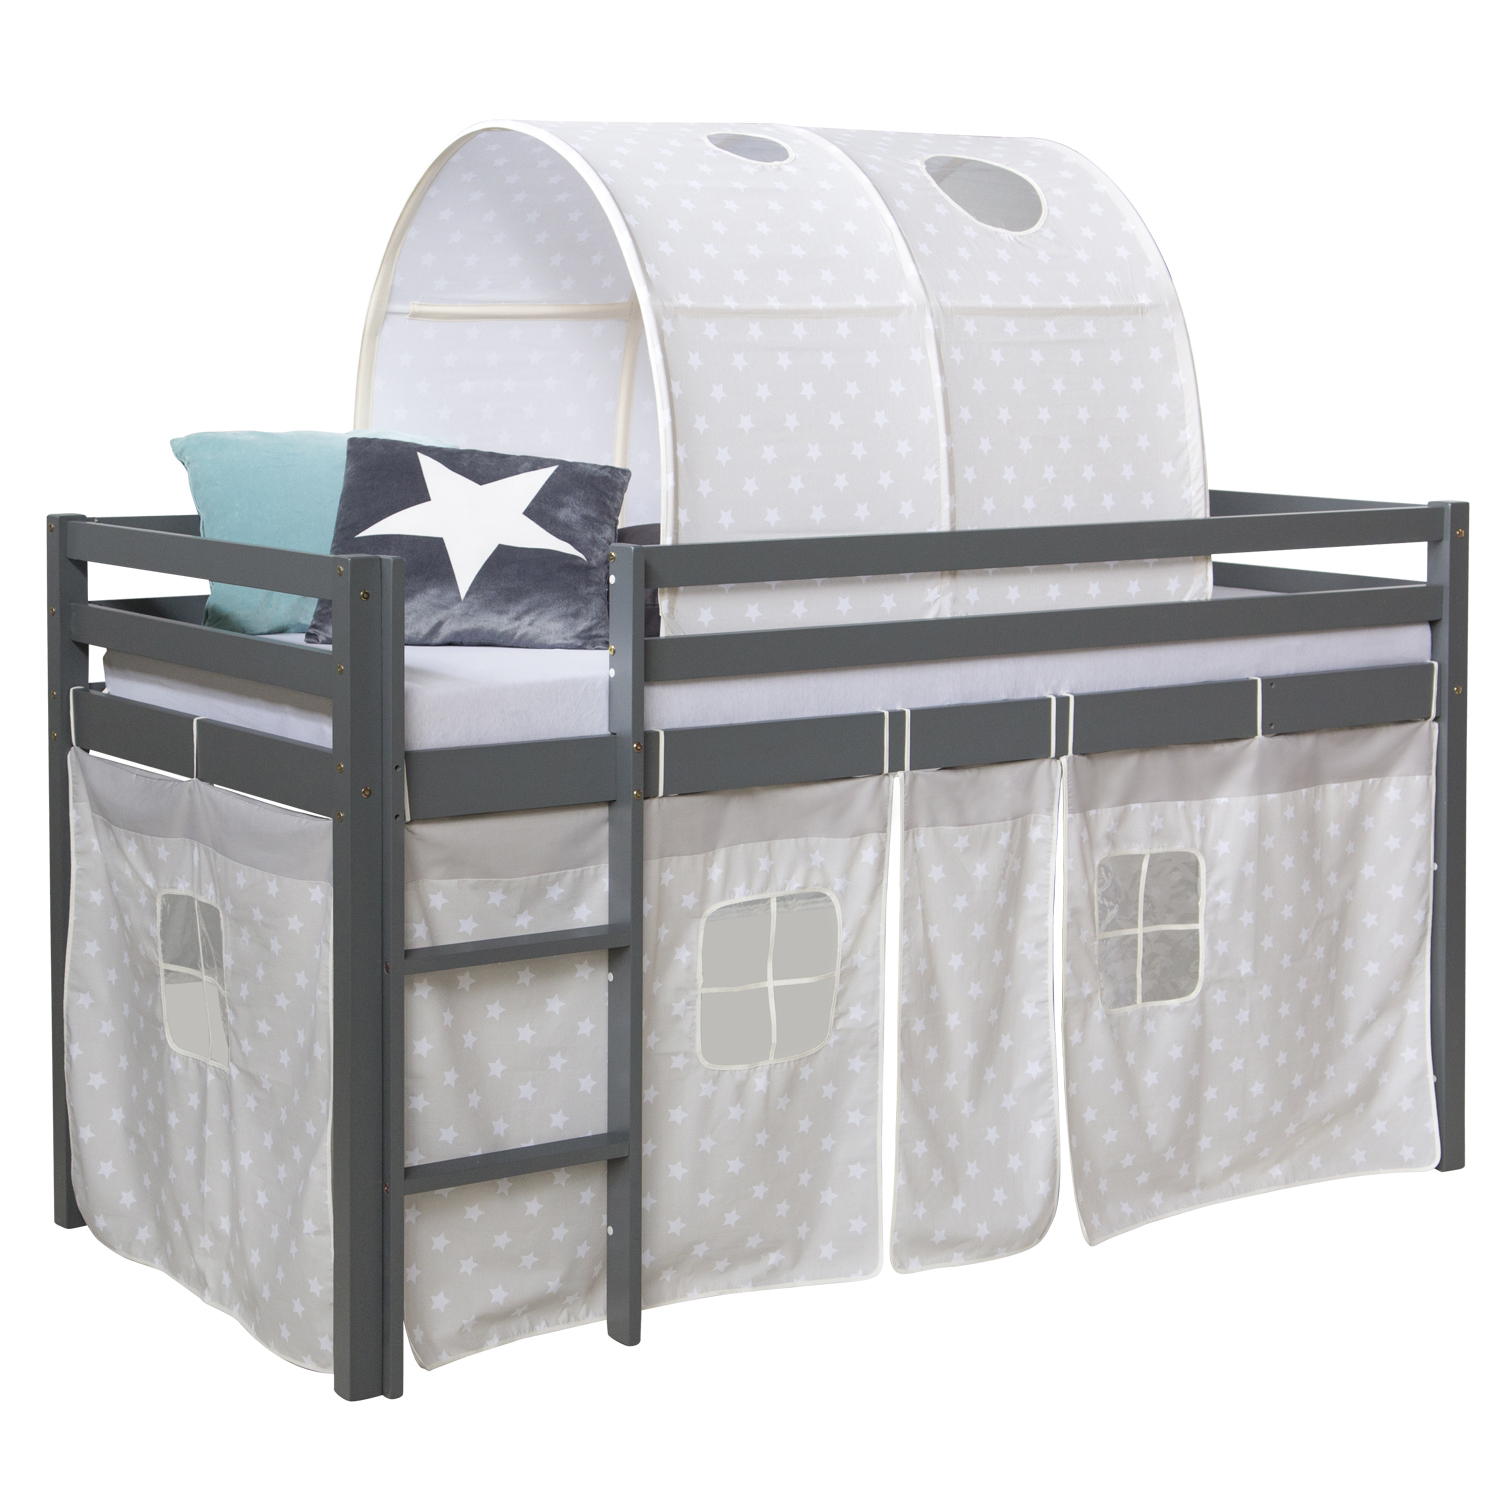 Childrenbed Tunnel Solid Pine Curtain grey stars 90x200